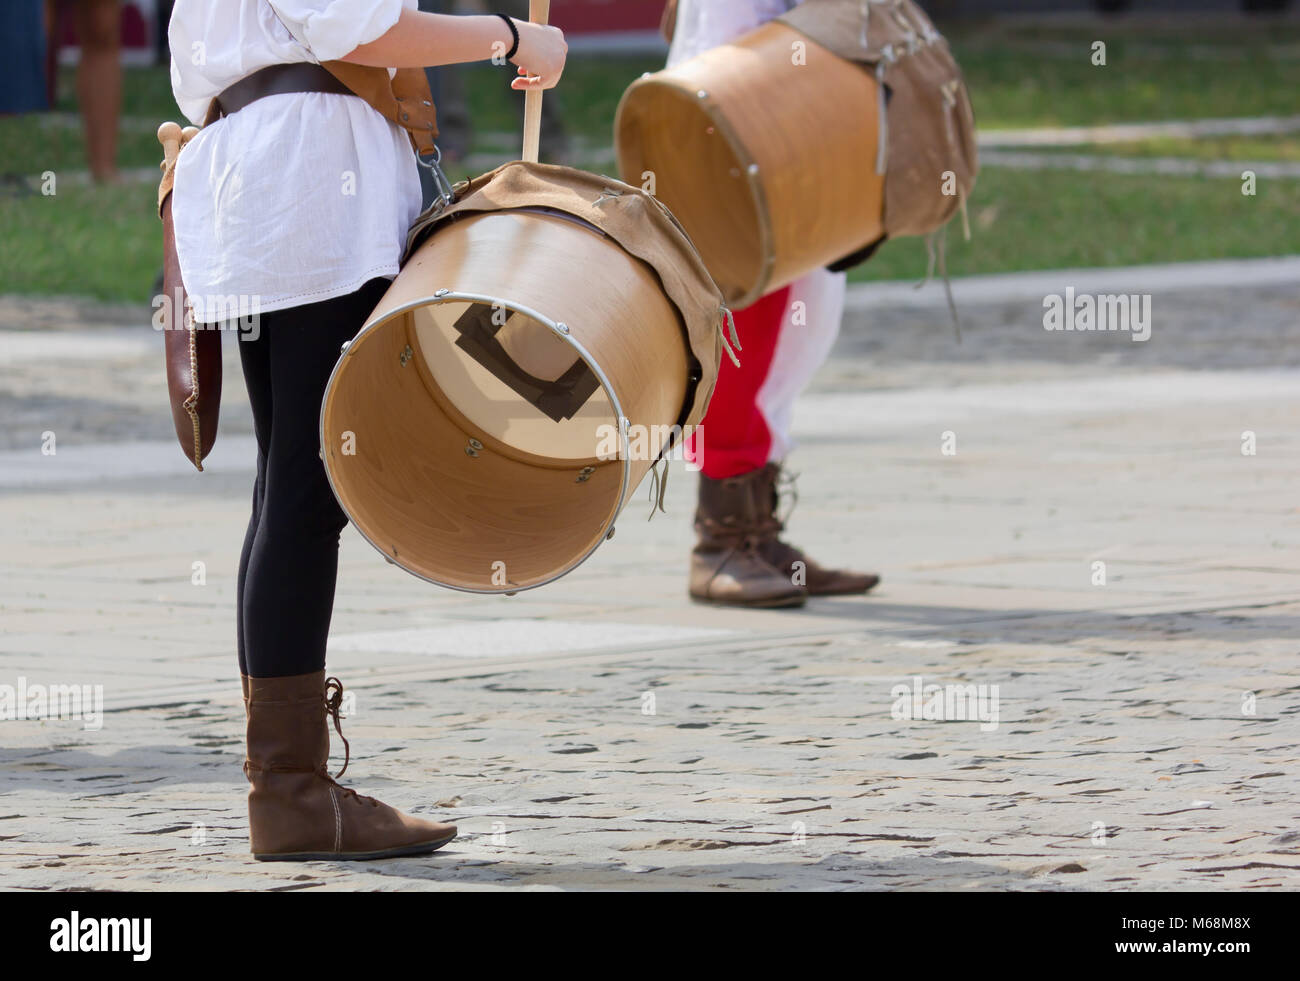 Close-up of two young drummers during a historic reenactment Stock Photo